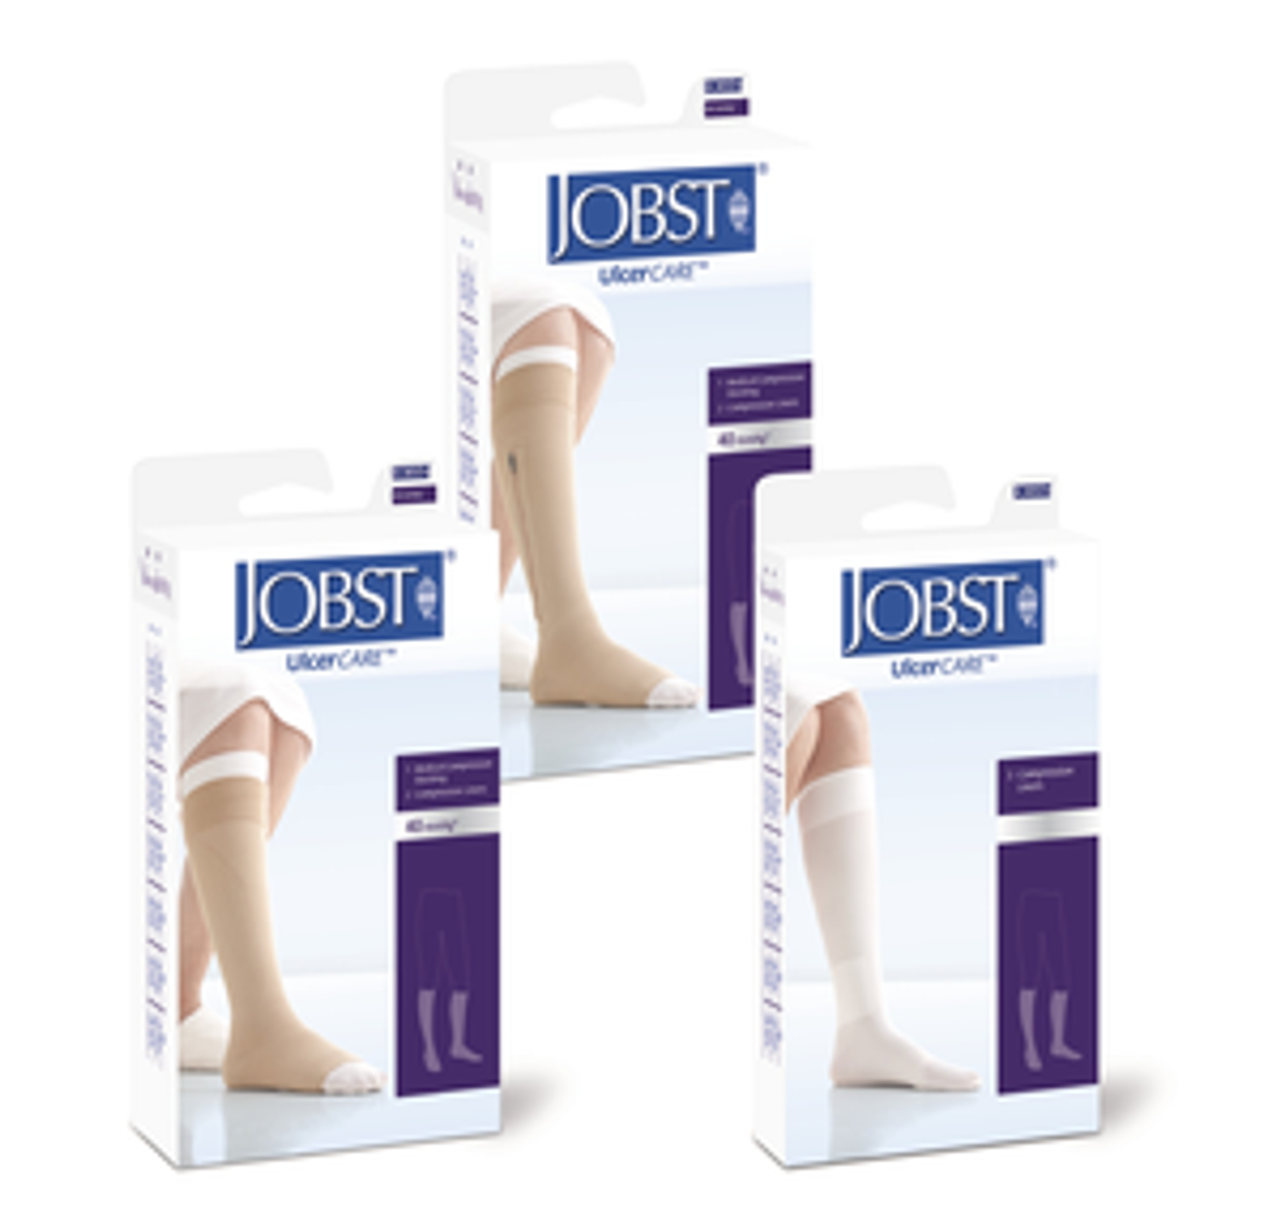 BSN-7363123 KT/1 JOBST ULCERCARE READY-TO-WEAR LG, LEFT ZIPPER, BEIGE (INCL 1 STOCKING AND 2 LINERS)